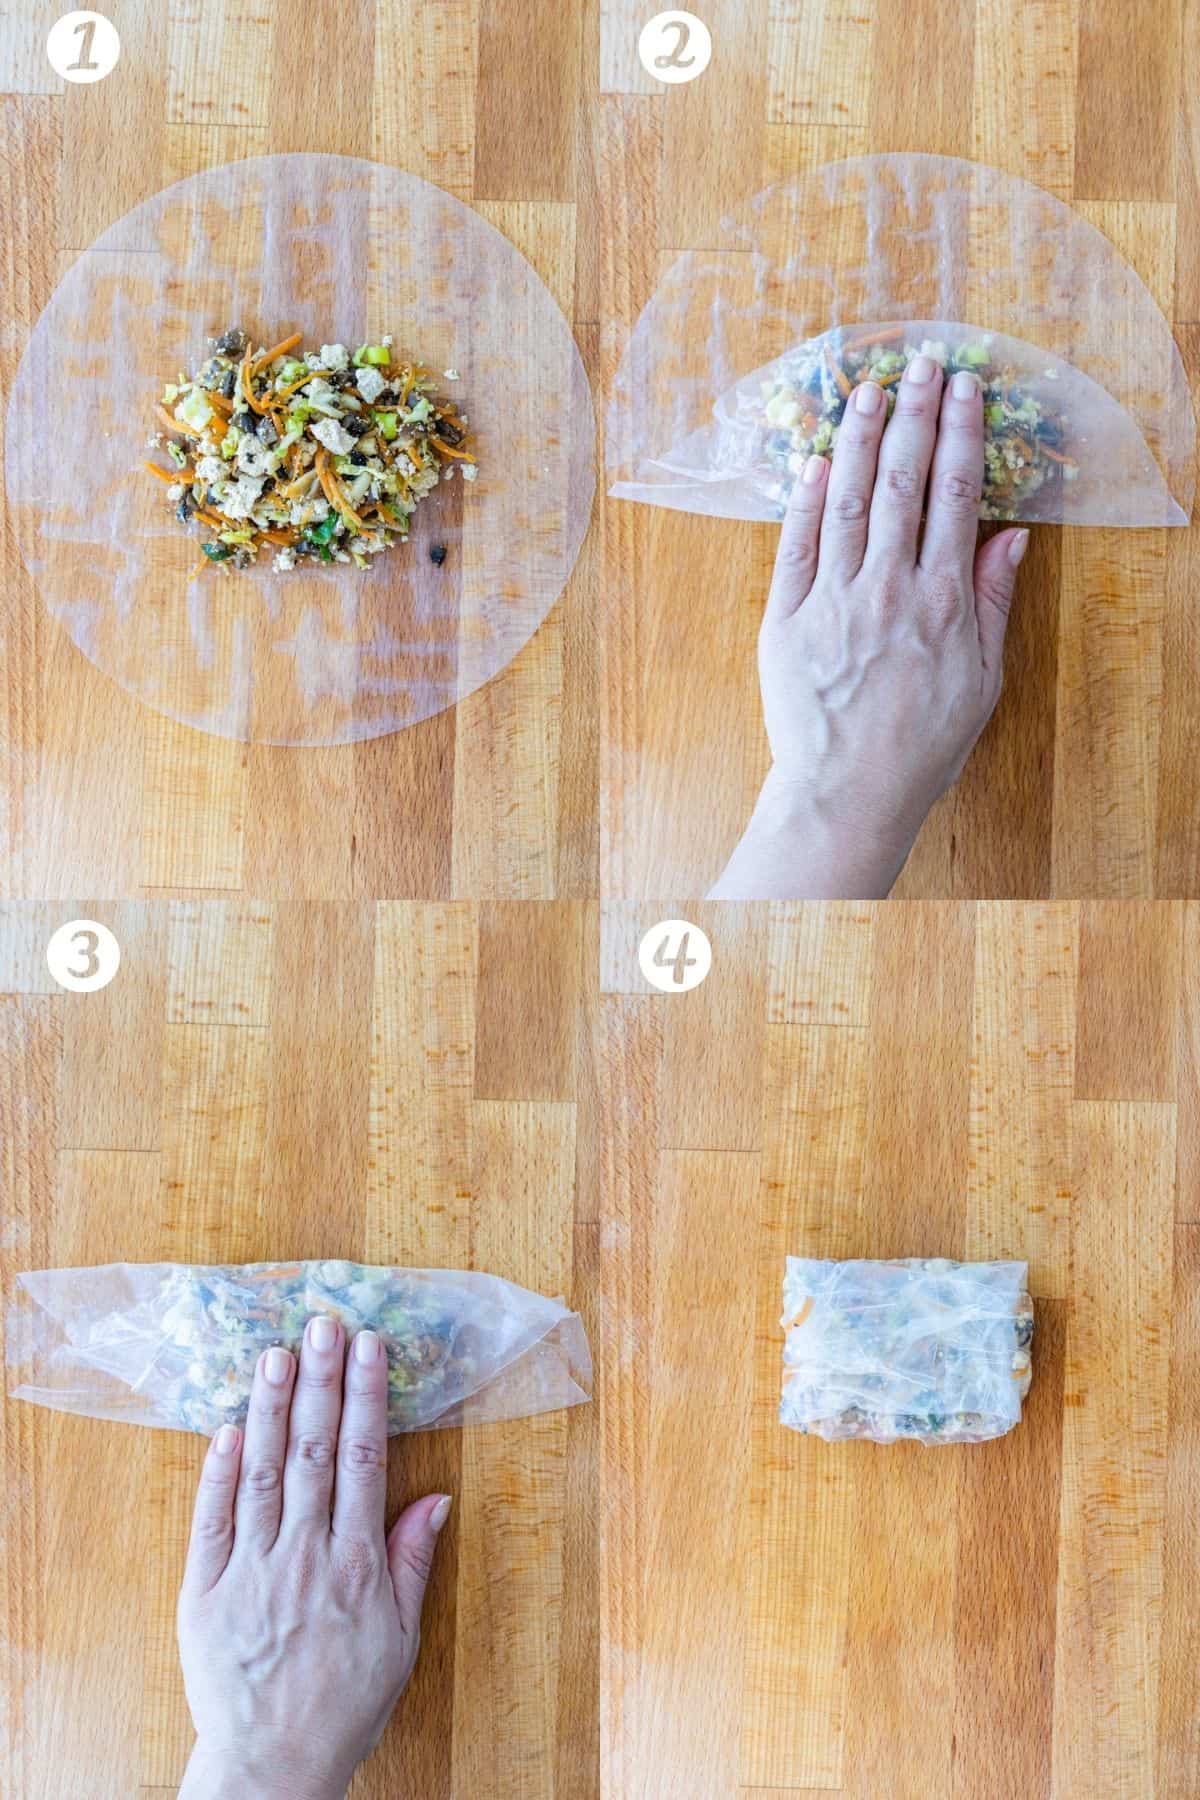 How to Bake With Rice Paper